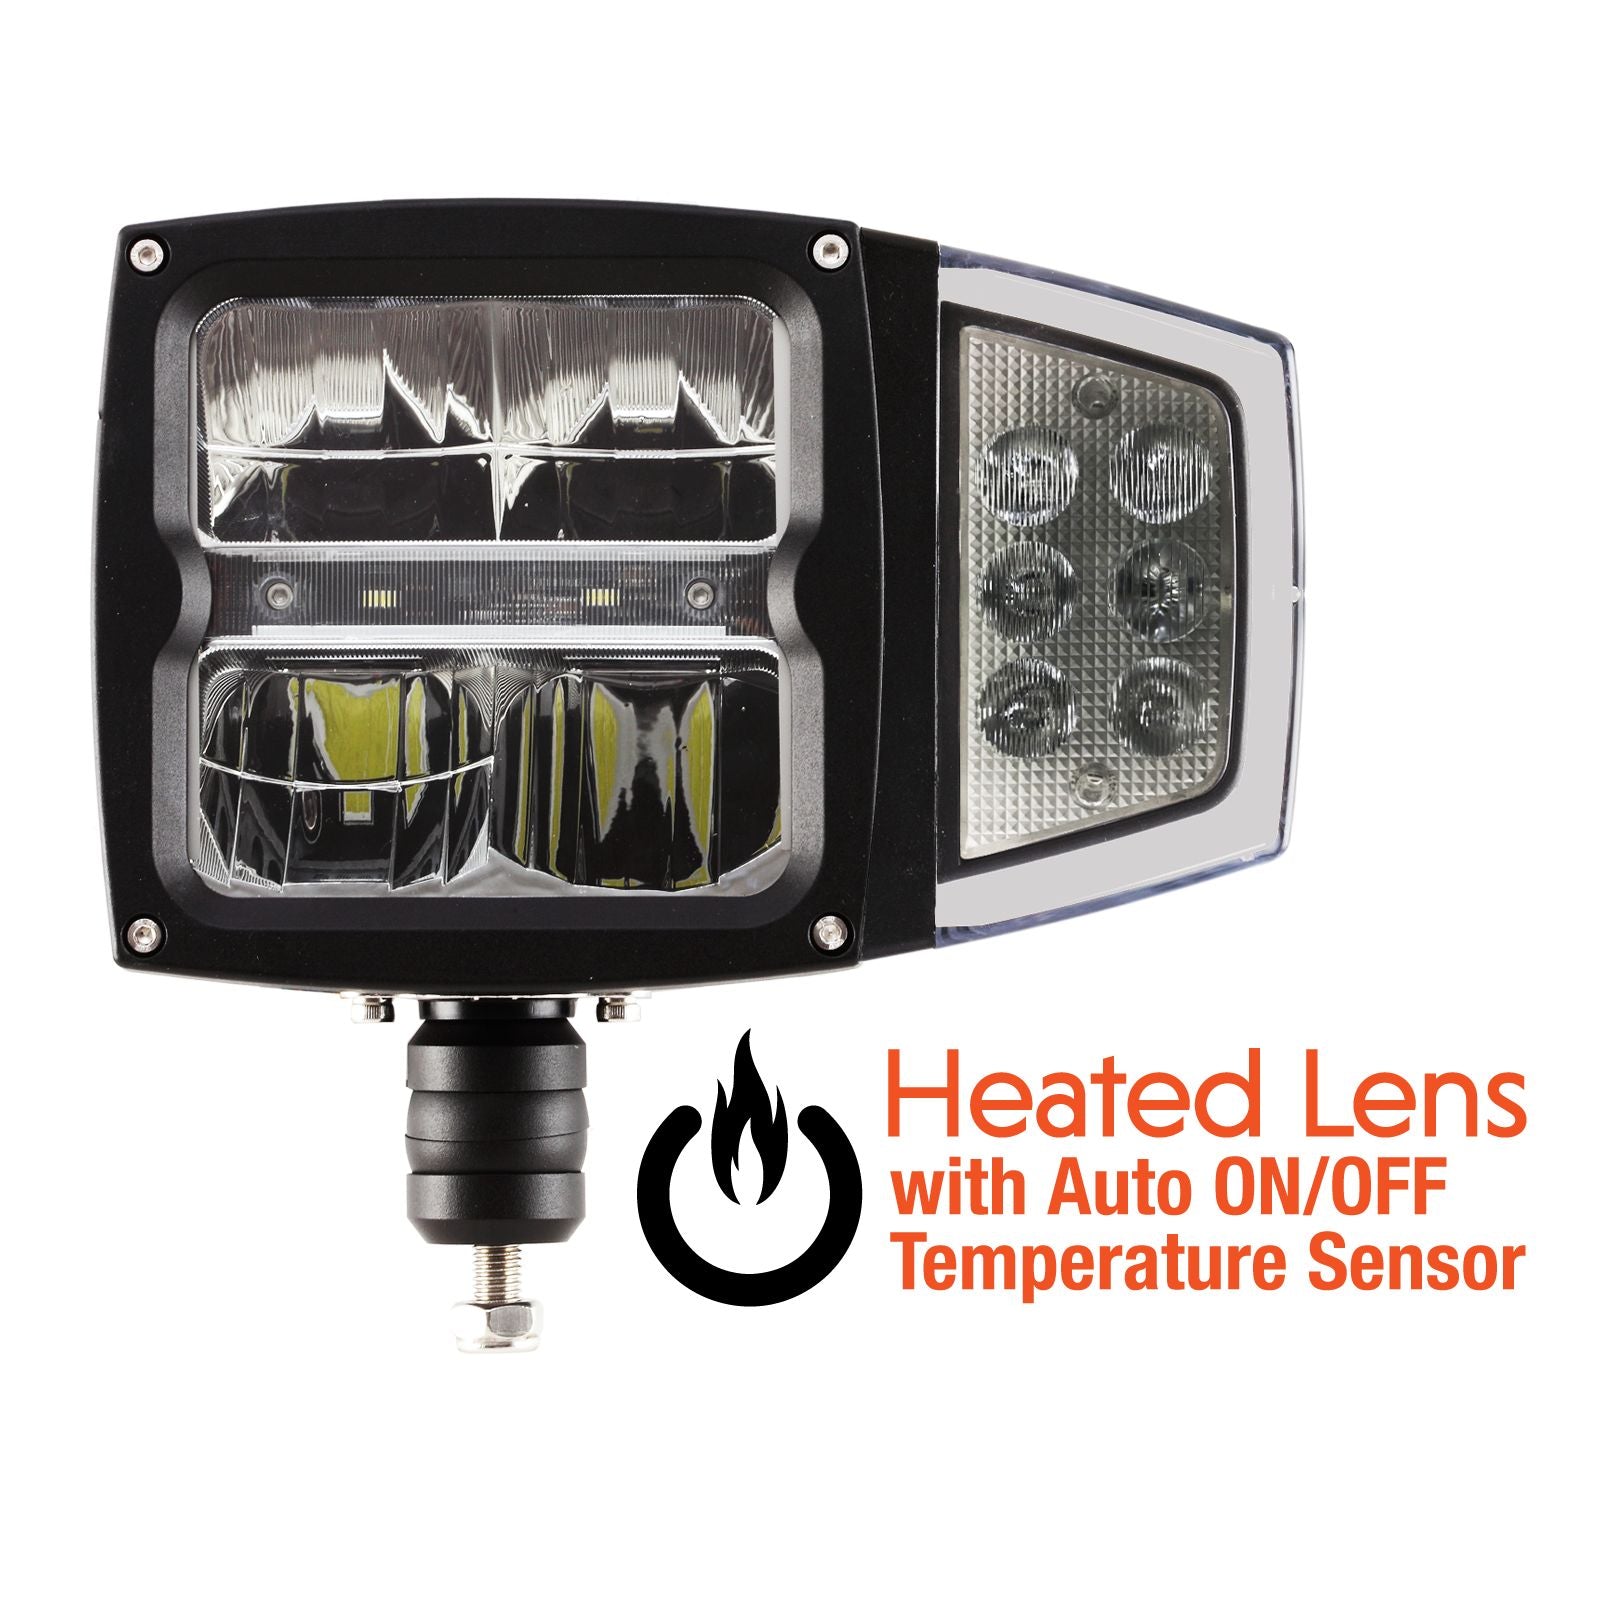 Uni-Bond LWP6600S - Heated Lens LED Snow Plow Light with Automatic On/Off Temperature Sensor